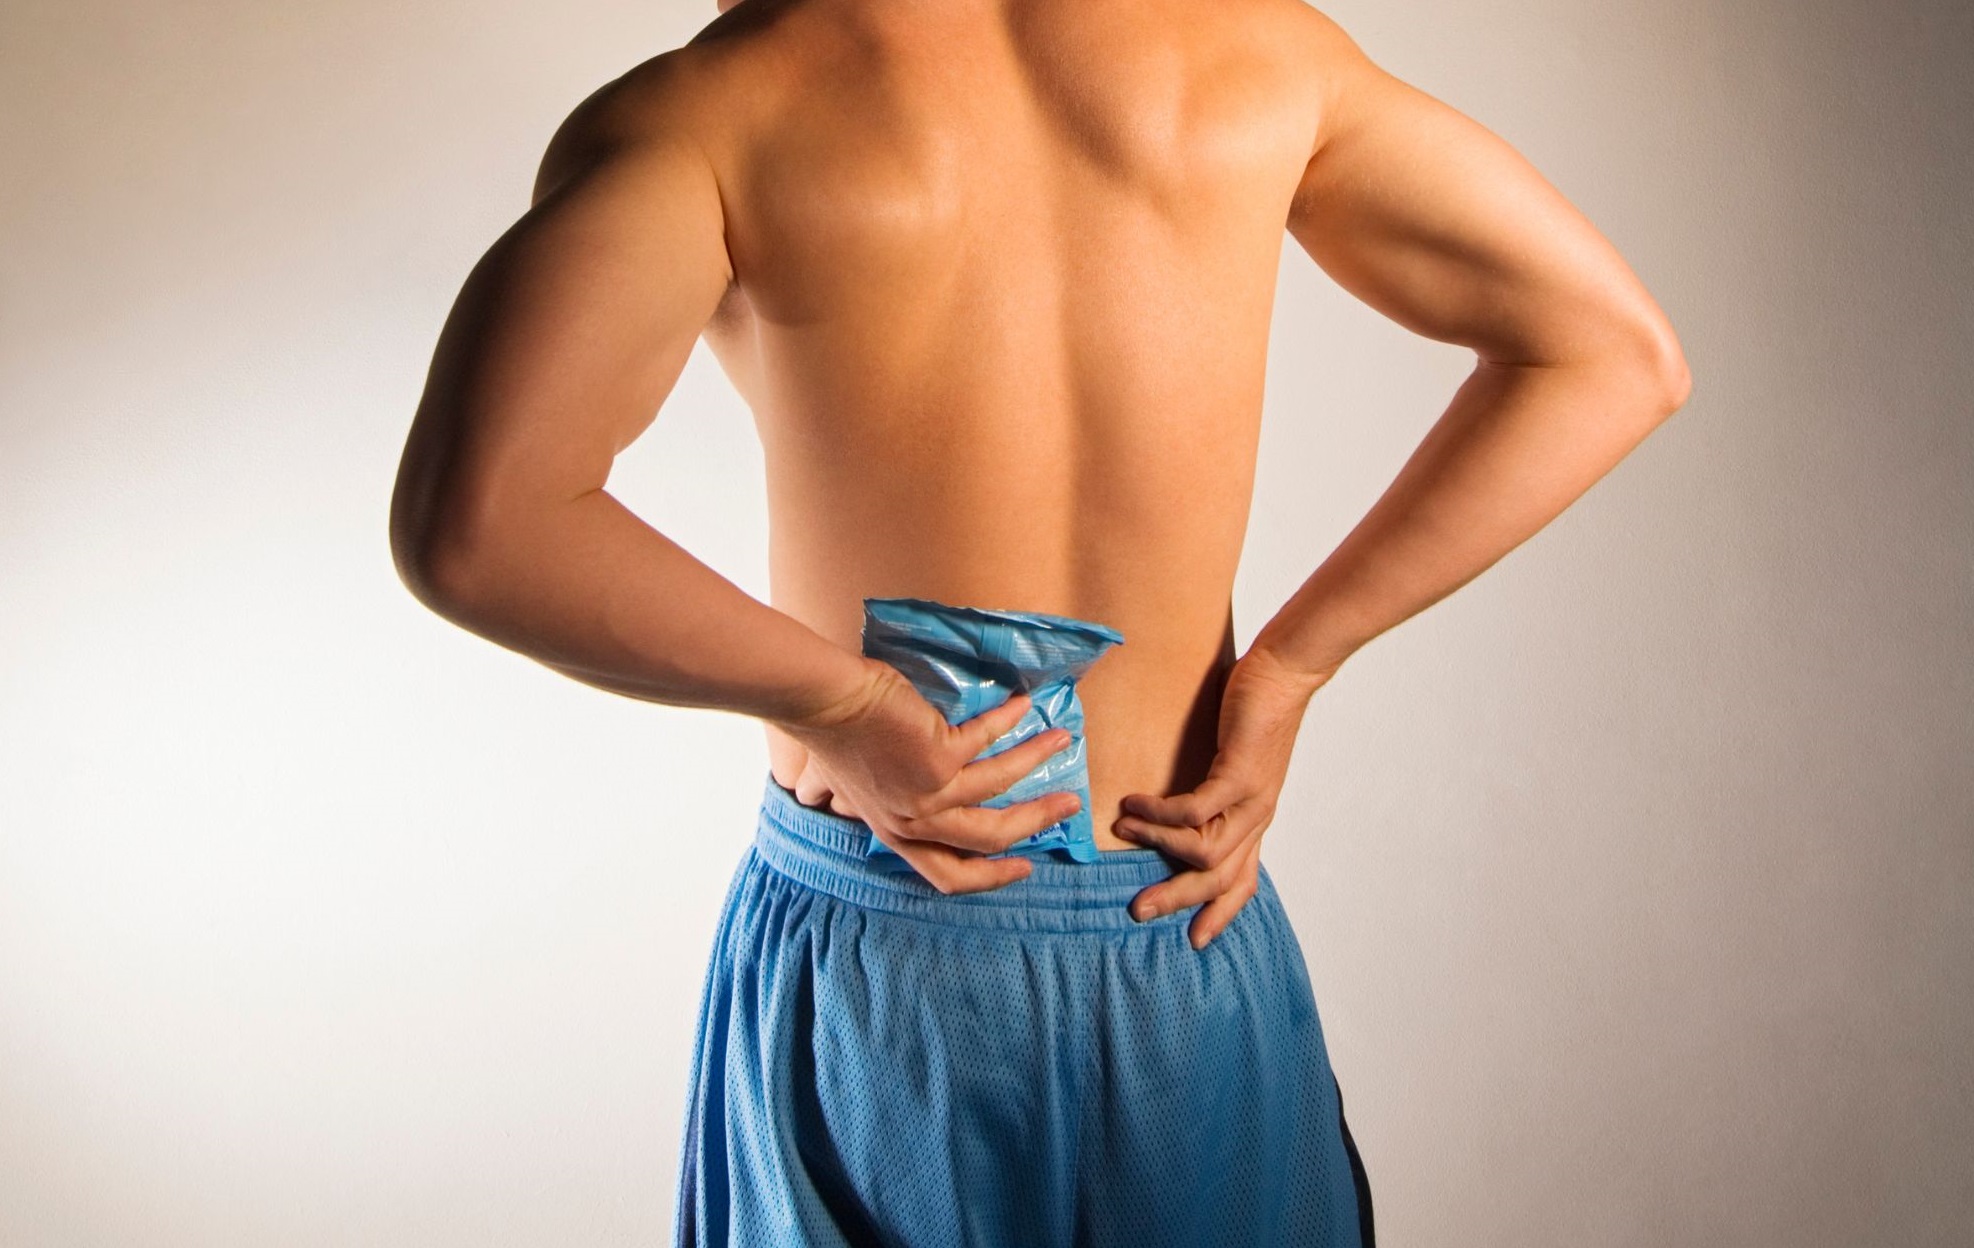 Ice Or Heat For Back Pain Relief – What’s Best?